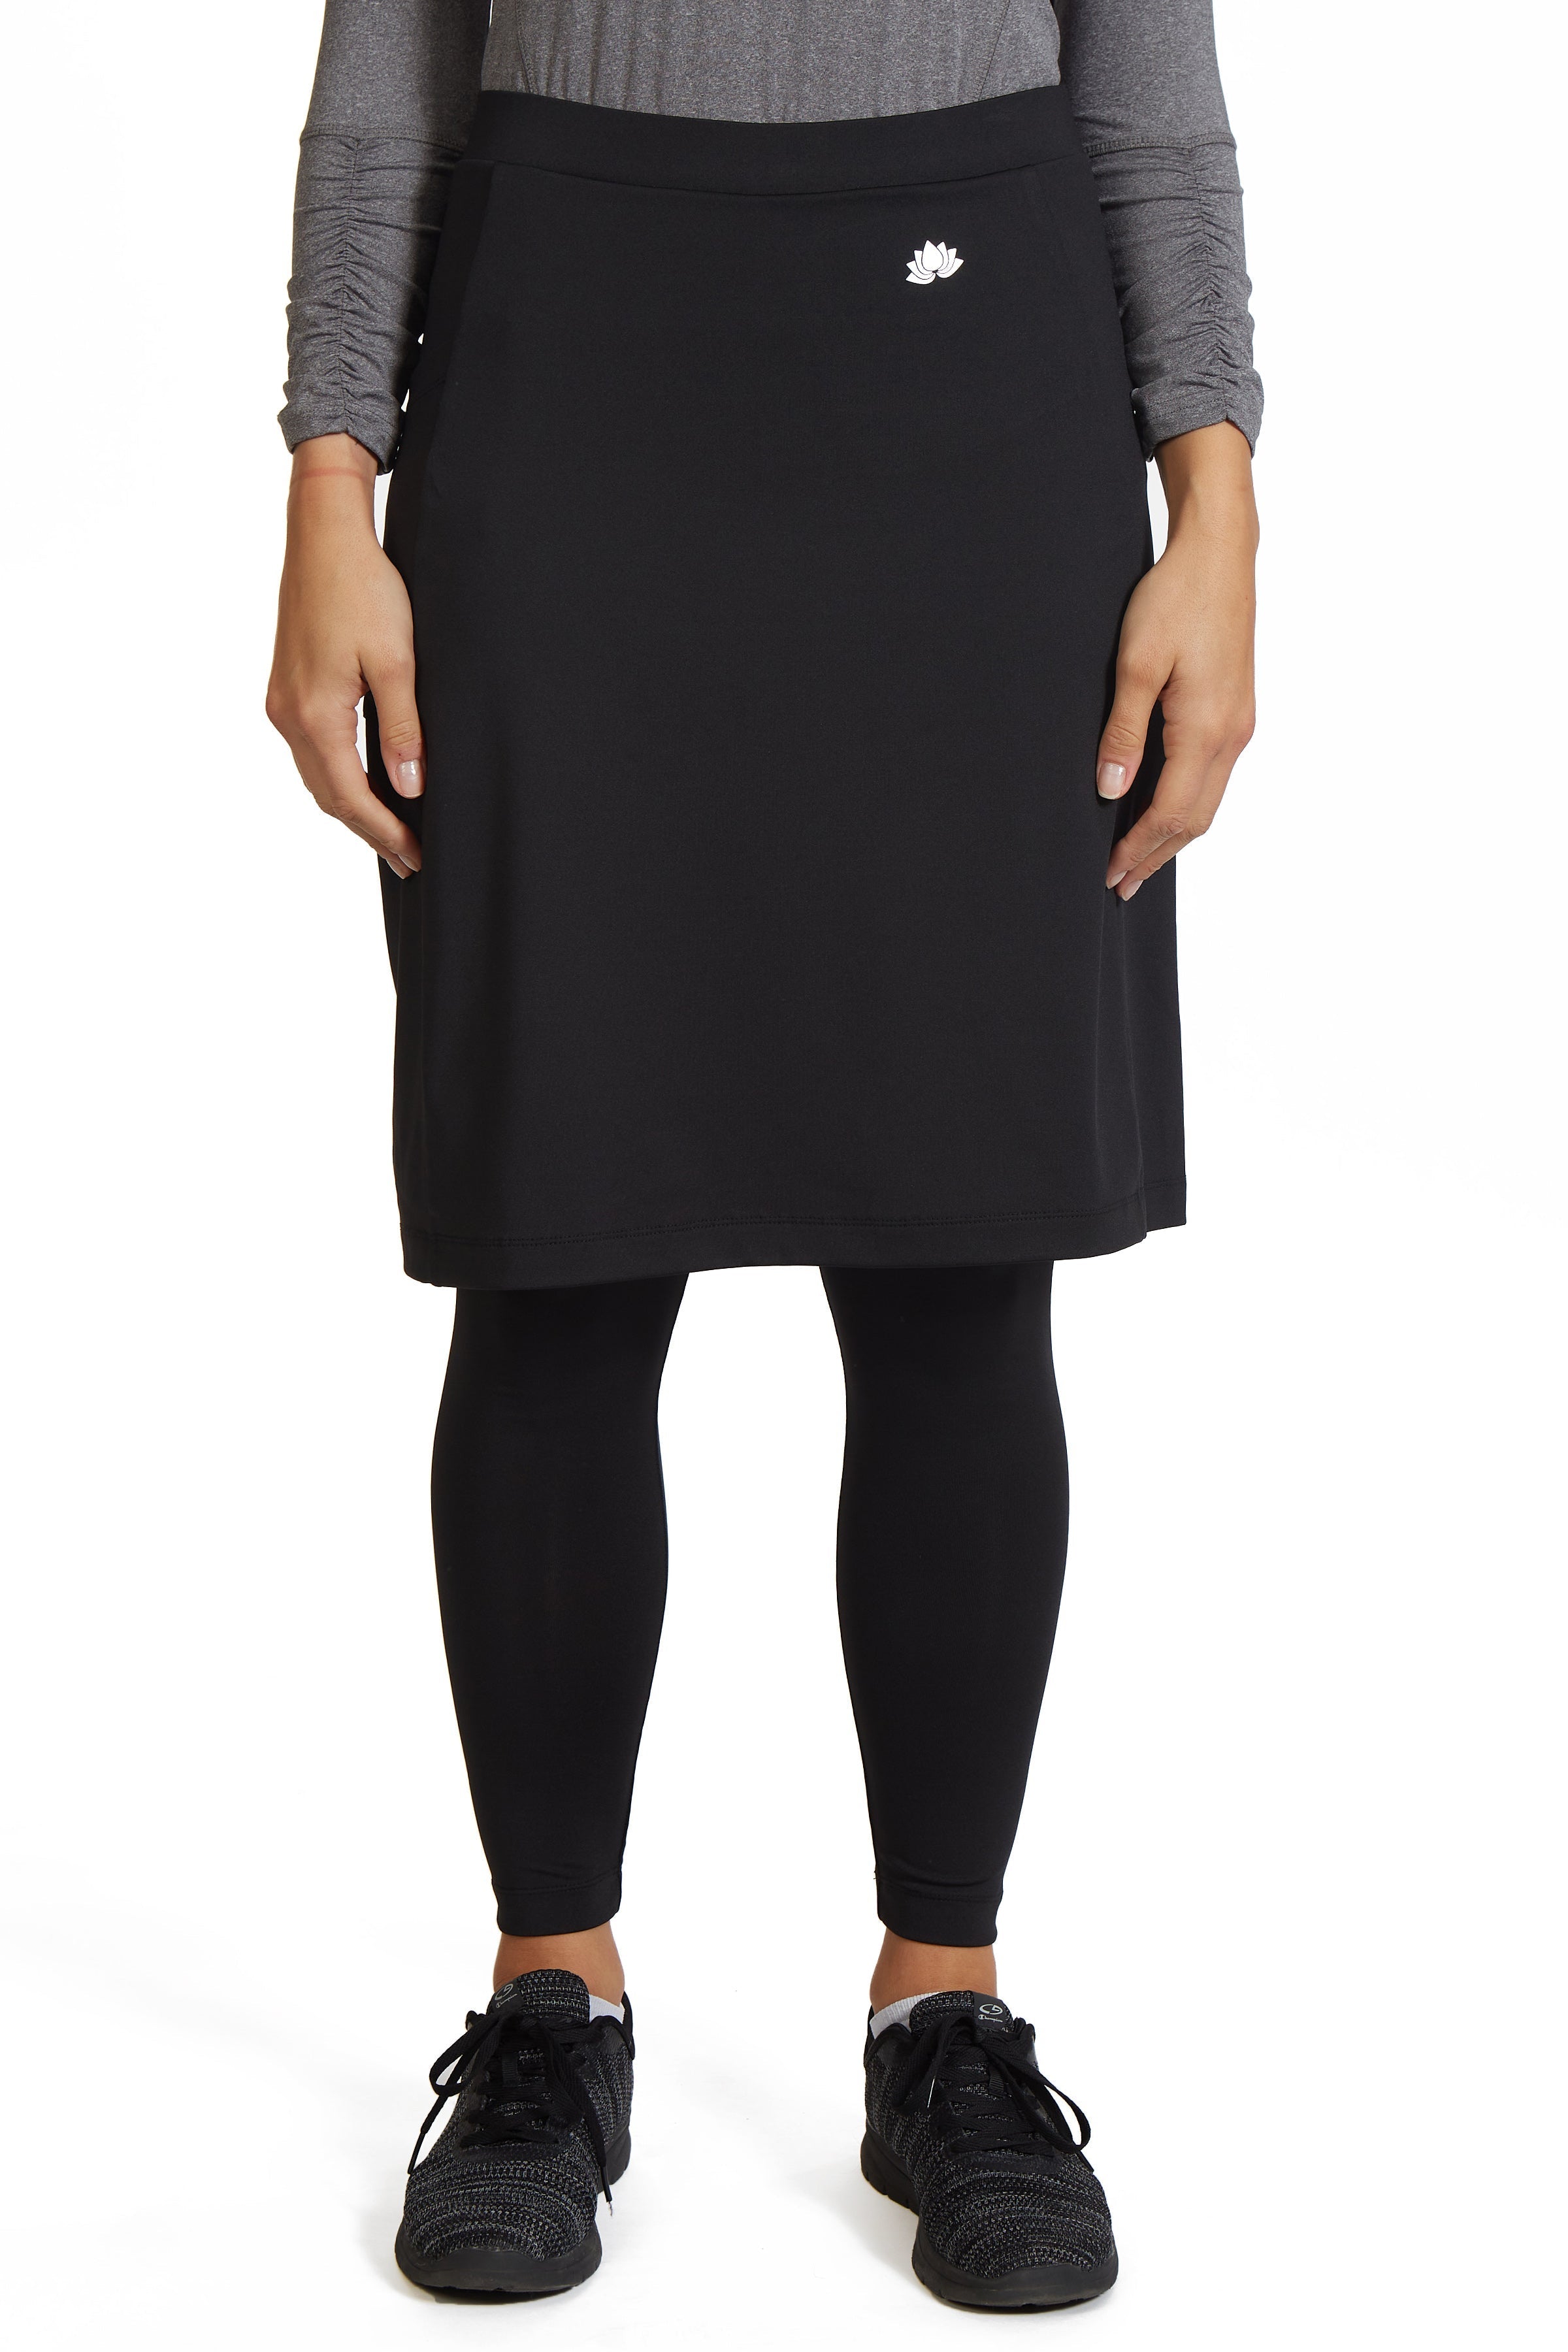 Athletic Pencil Skirt with Long Leggings